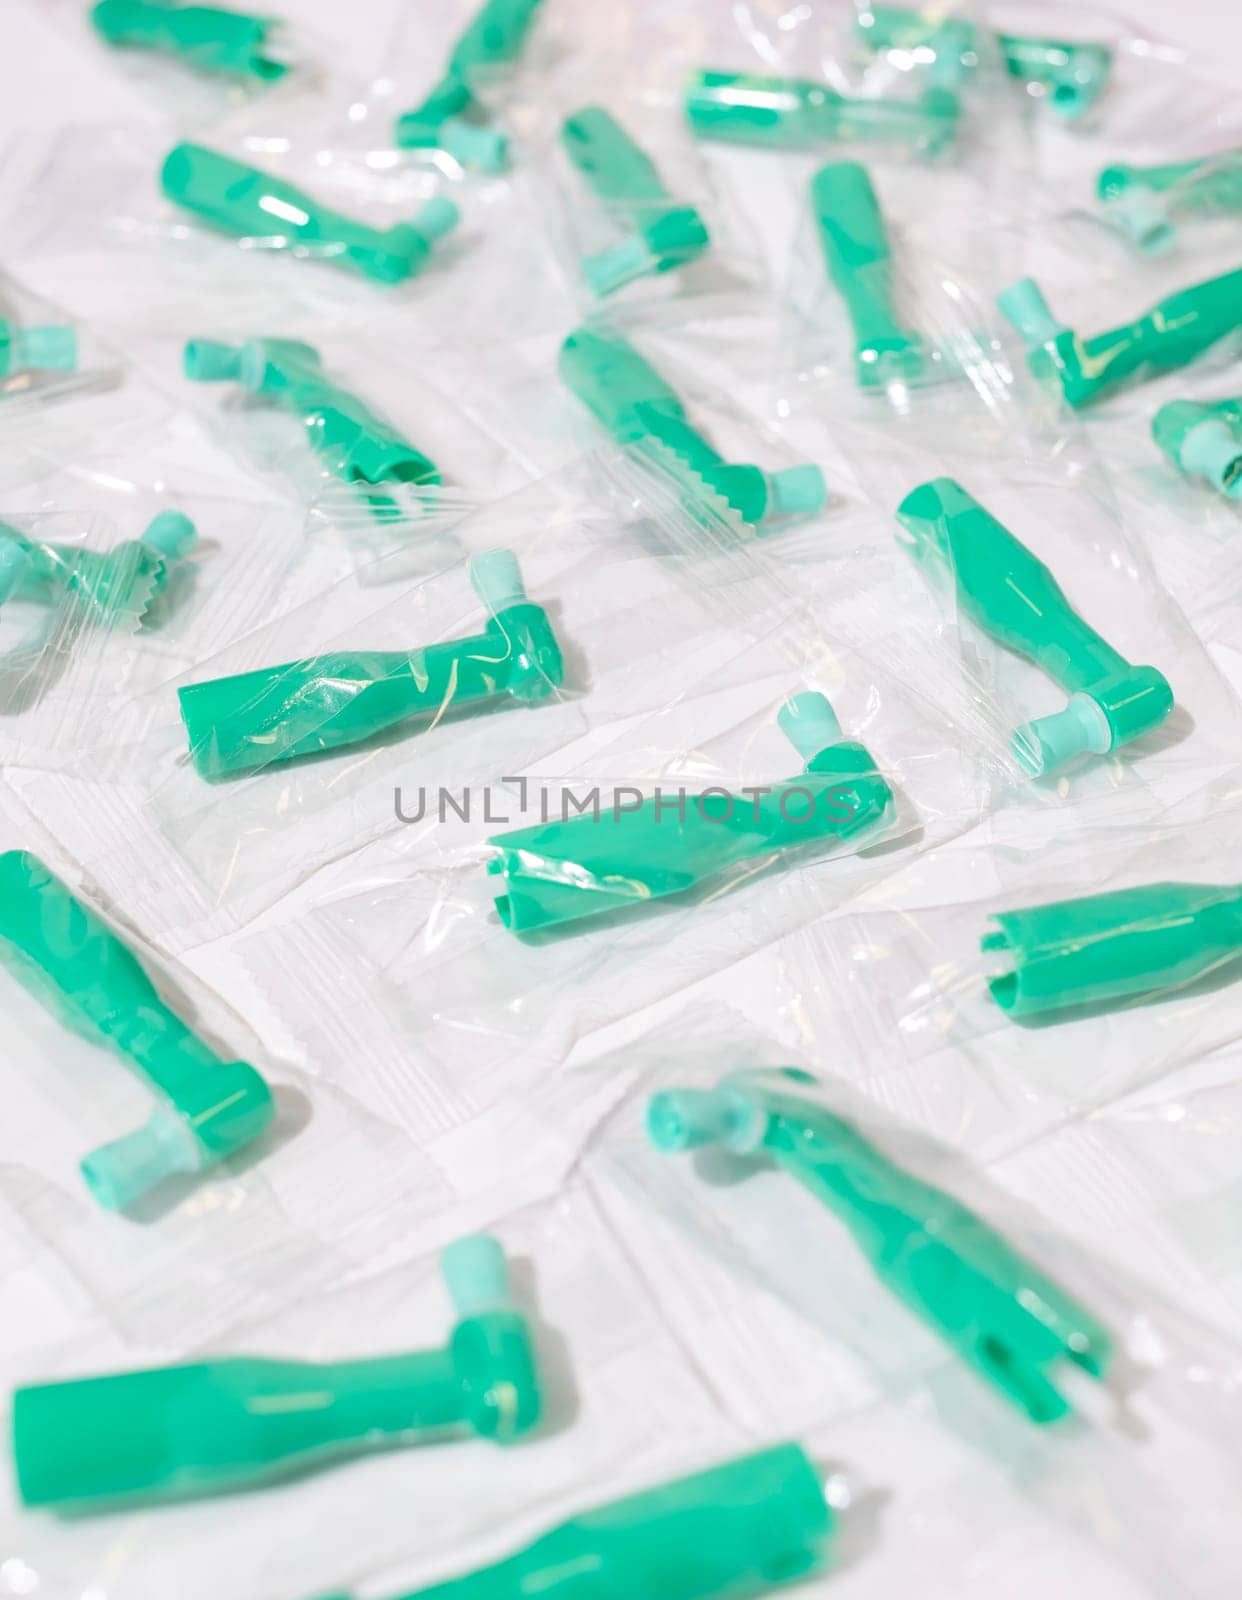 Green Disposable Prophy Angles with Brush, Ergonomic Shape on White Background. Dentistry, Orthodontic Product. Vertical Plane. Oral Hygiene. by netatsi